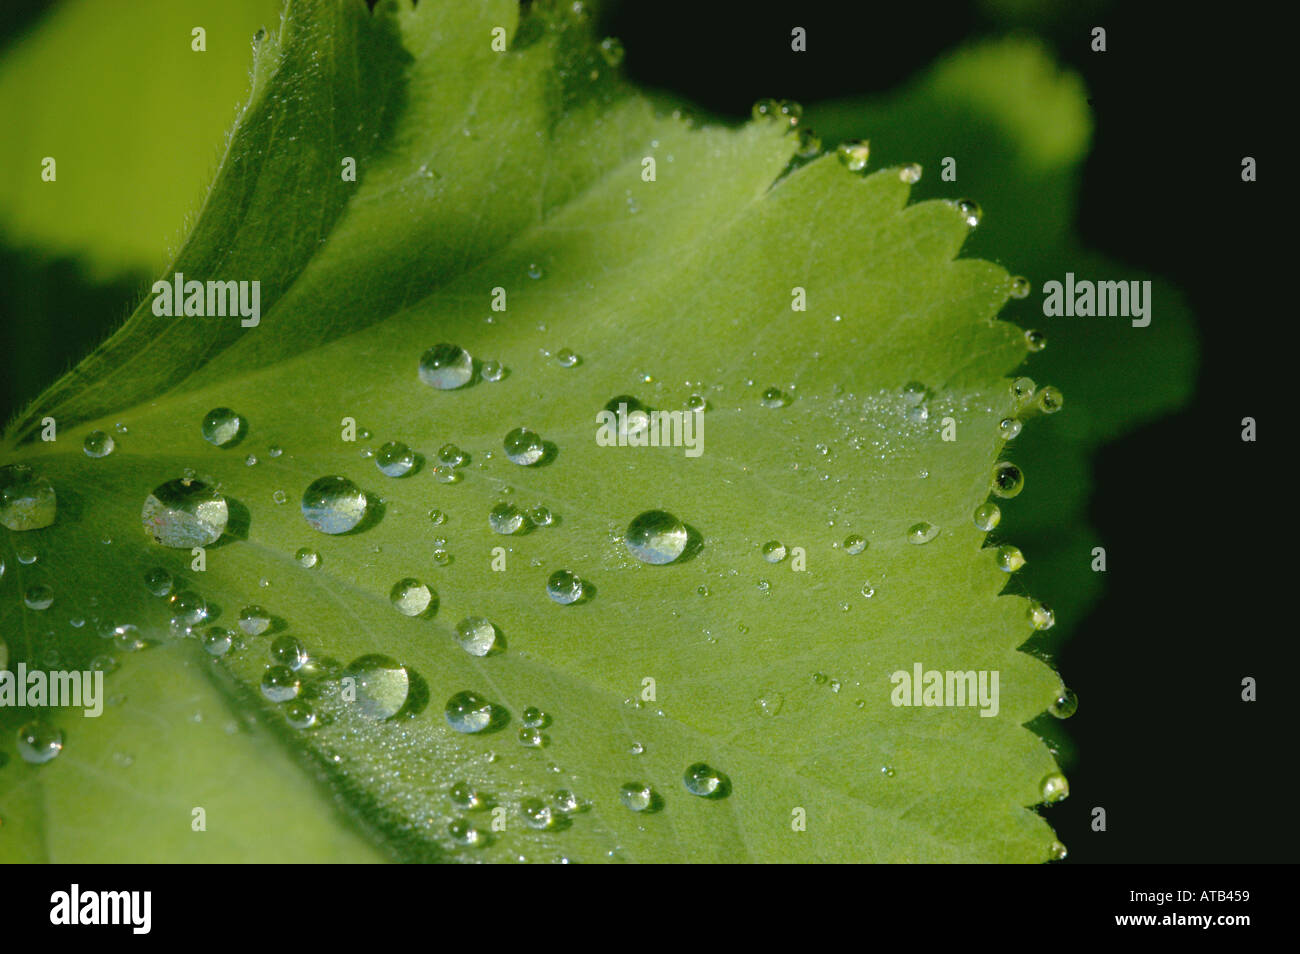 Water drops on ladys mantle leaf Stock Photo